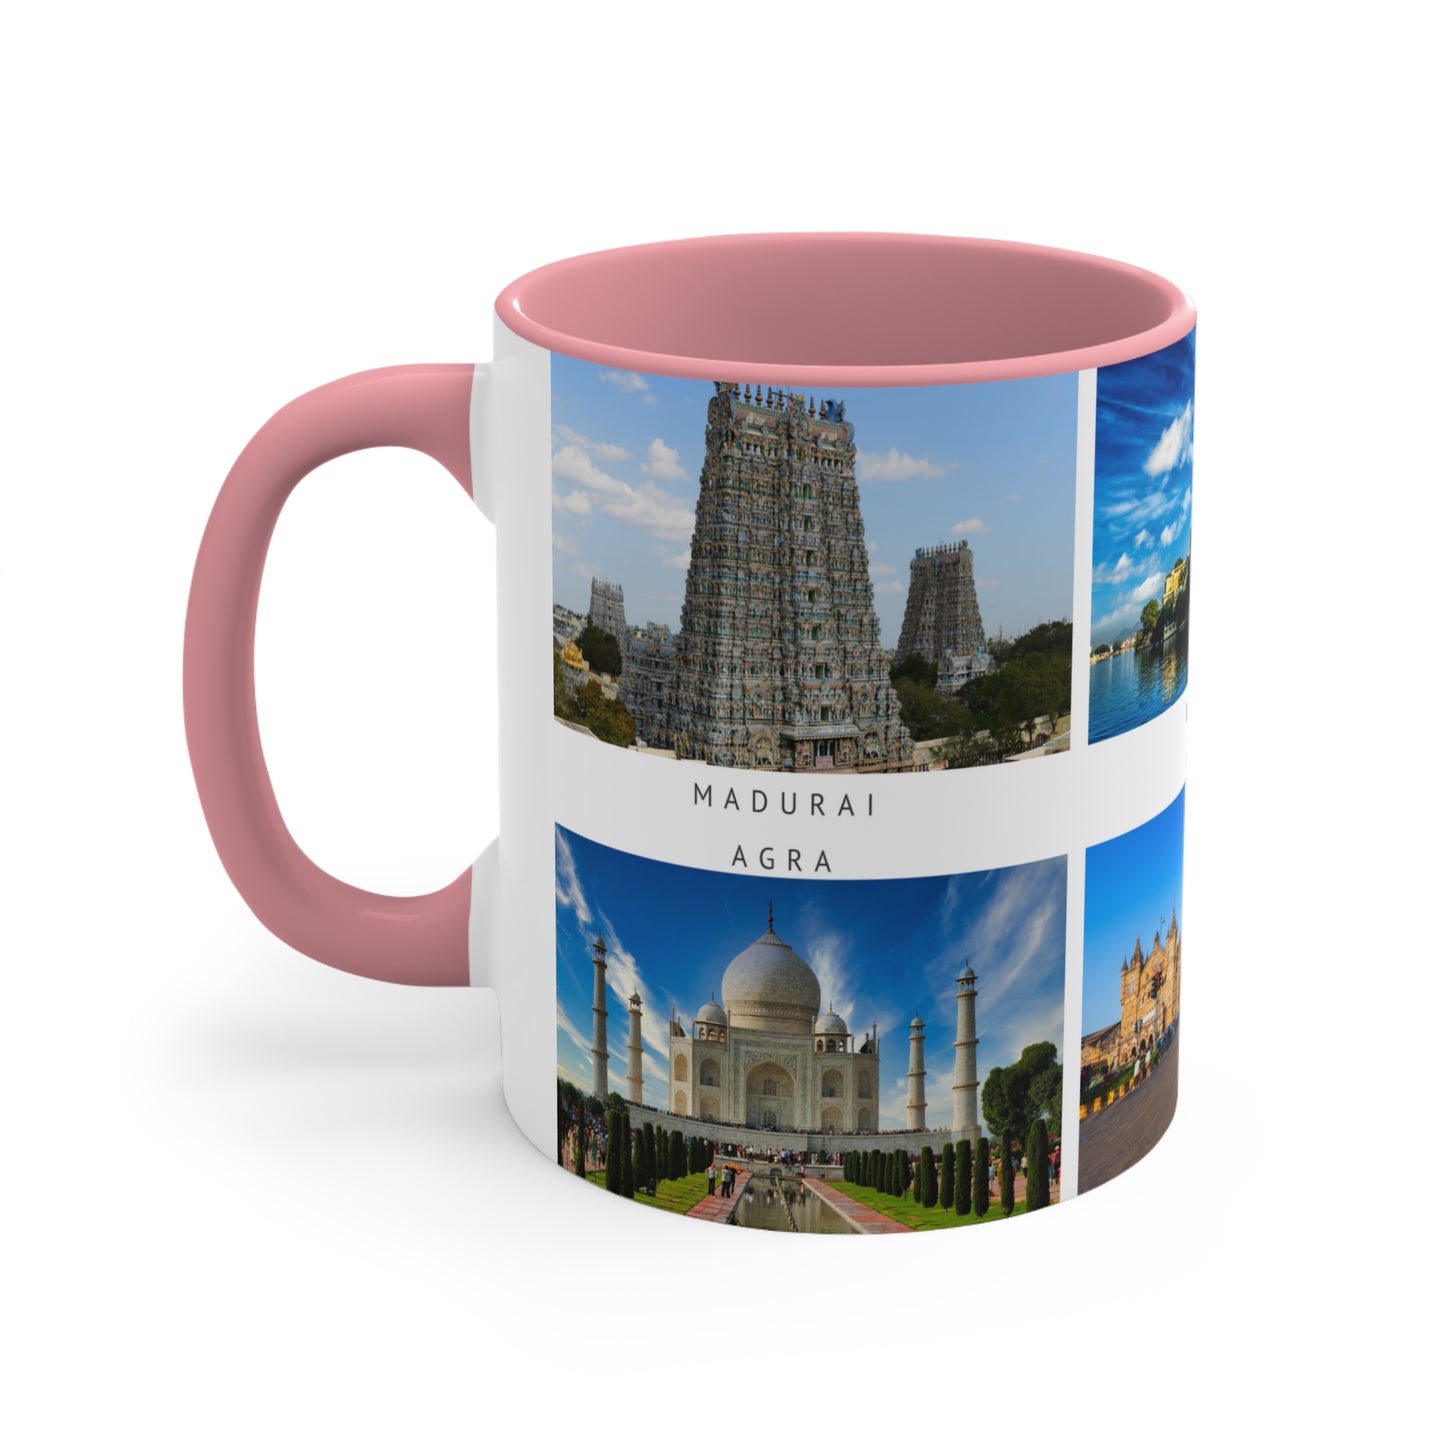 India! This Travel Accent Coffee Mug is a part of a Travel Series for you to choose from. 11oz. Great as a gift or get one to enjoy yourself.